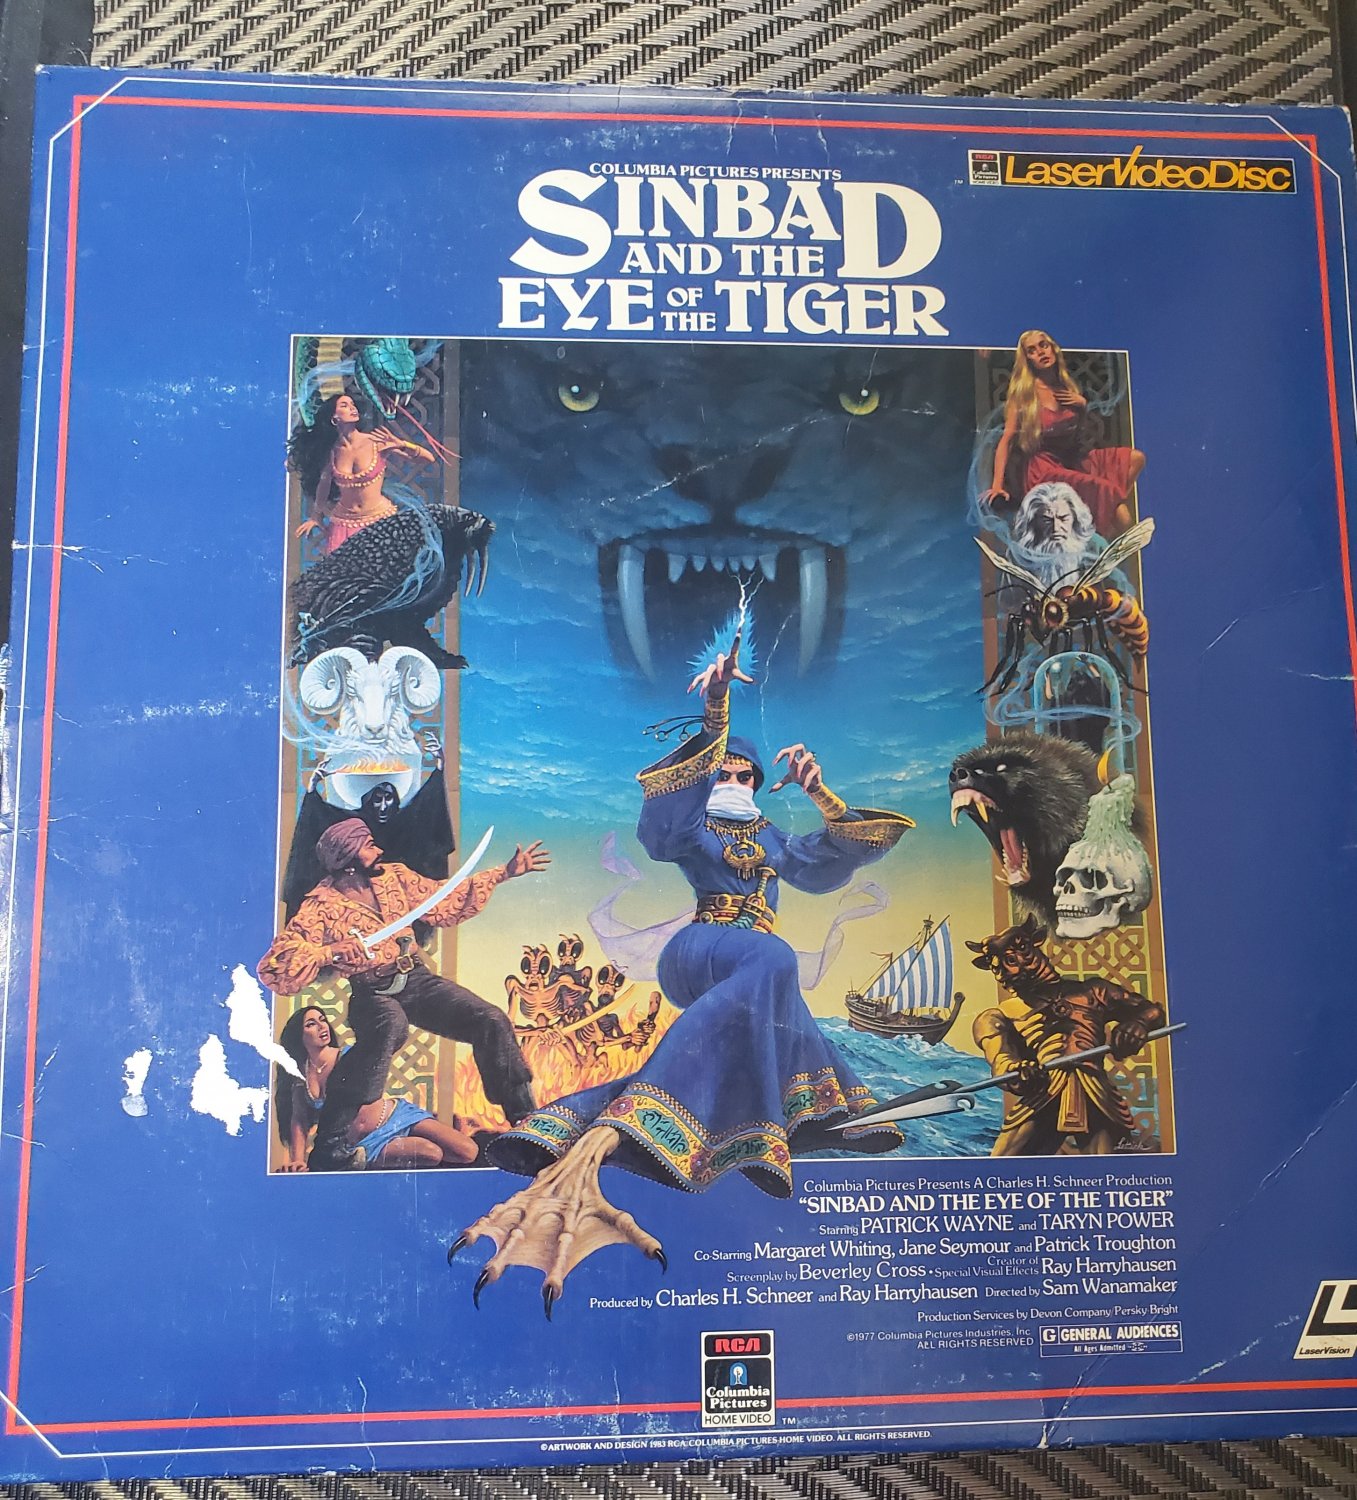 Video Laserdisc Sinbad And The Eye Of The Tiger